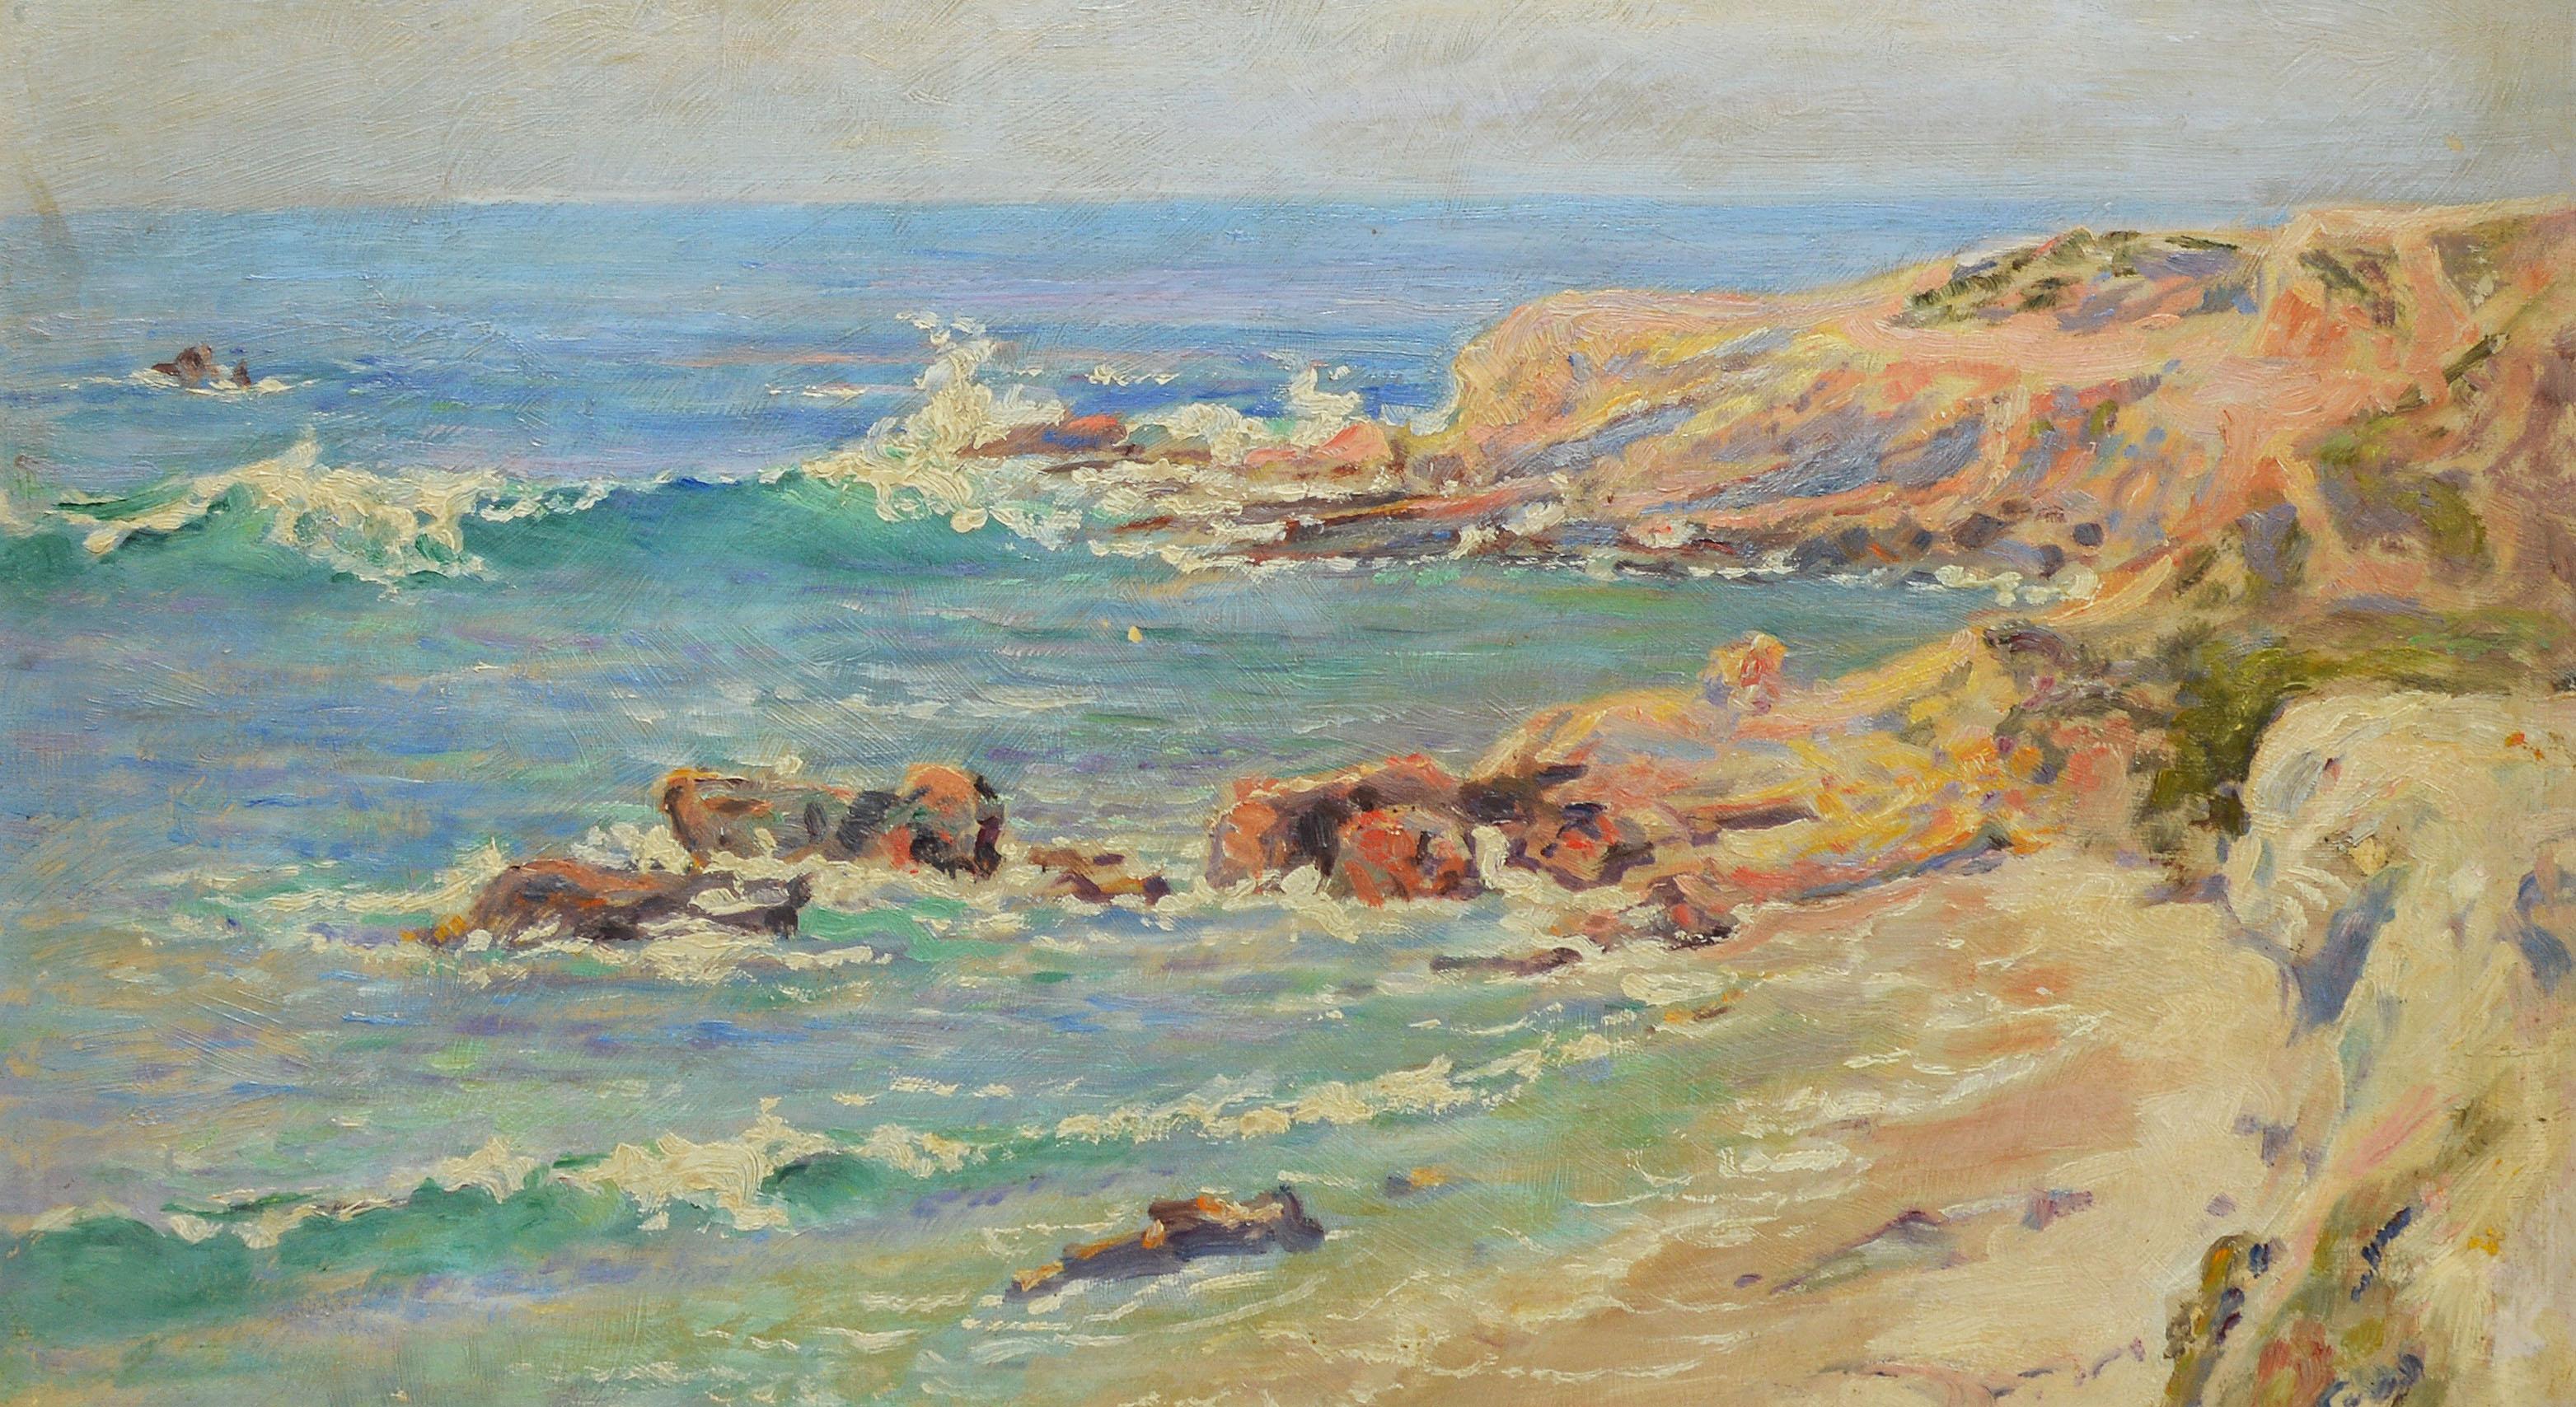 Impressionist view of Laguna Beach, California by Frank French  (1850 - 1933).  Oil on board, circa 1900.  Signed lower right.  Displayed in a period giltwood frame.  Image size, 16